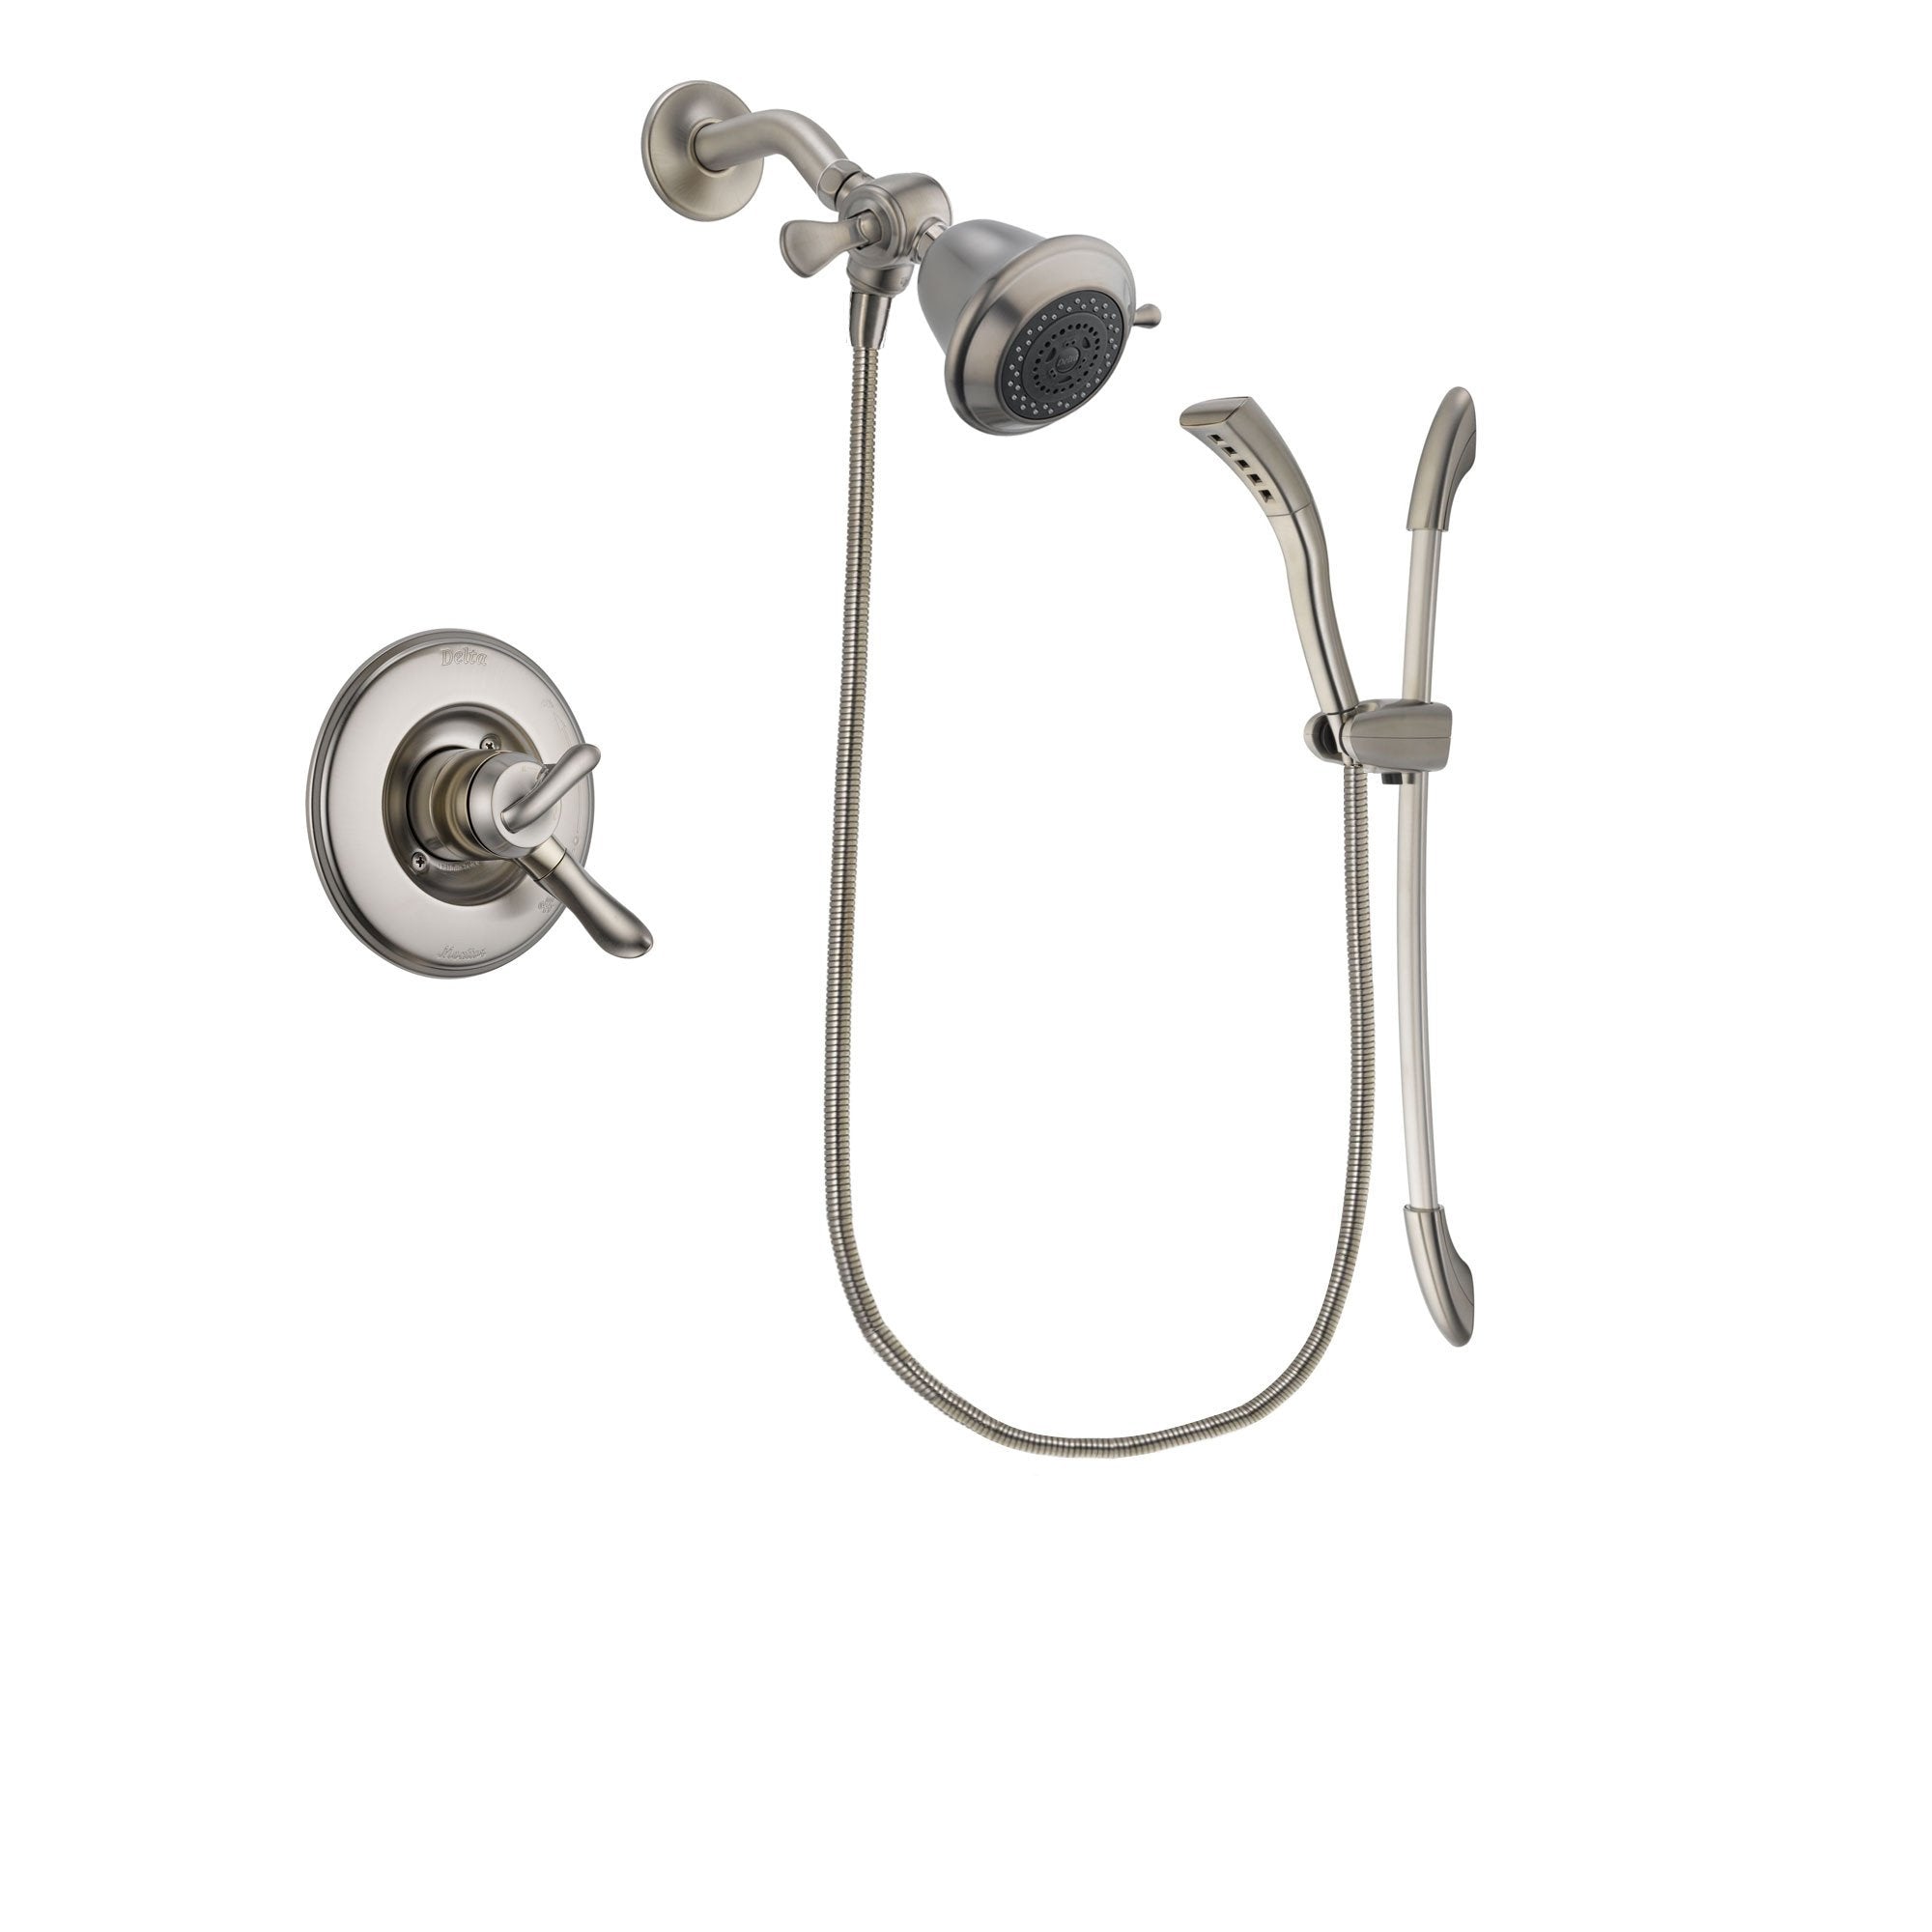 Delta Linden Stainless Steel Finish Dual Control Shower Faucet System Package with Shower Head and Handshower with Slide Bar Includes Rough-in Valve DSP1408V